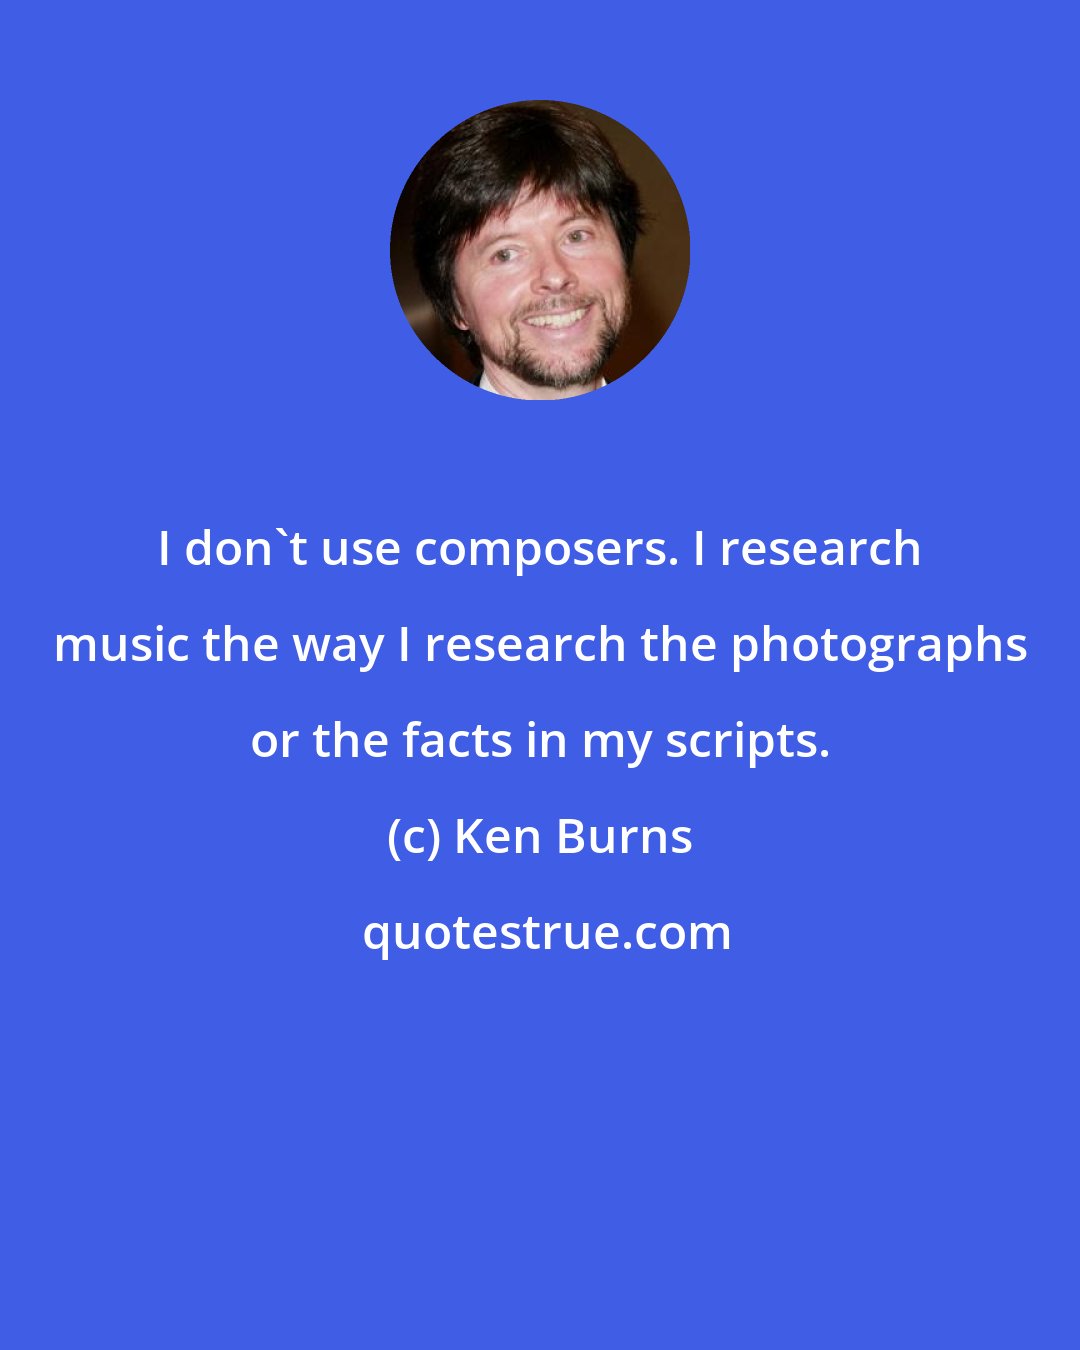 Ken Burns: I don't use composers. I research music the way I research the photographs or the facts in my scripts.